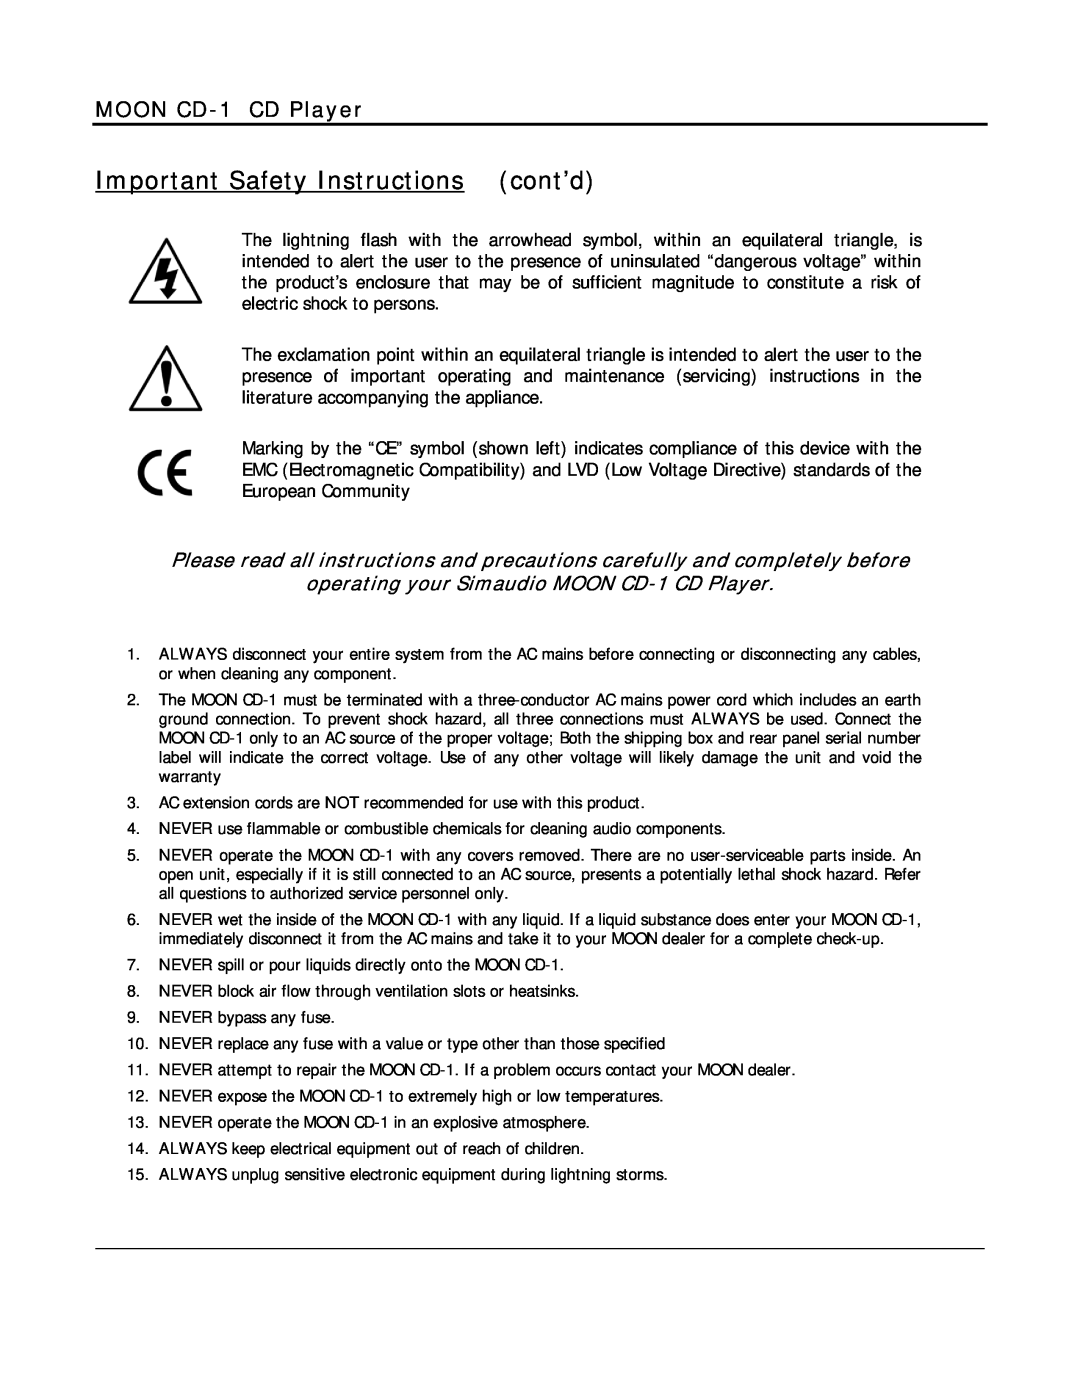 Simaudio owner manual Important Safety Instructionscont’d, operating your Simaudio MOON CD-1CD Player 